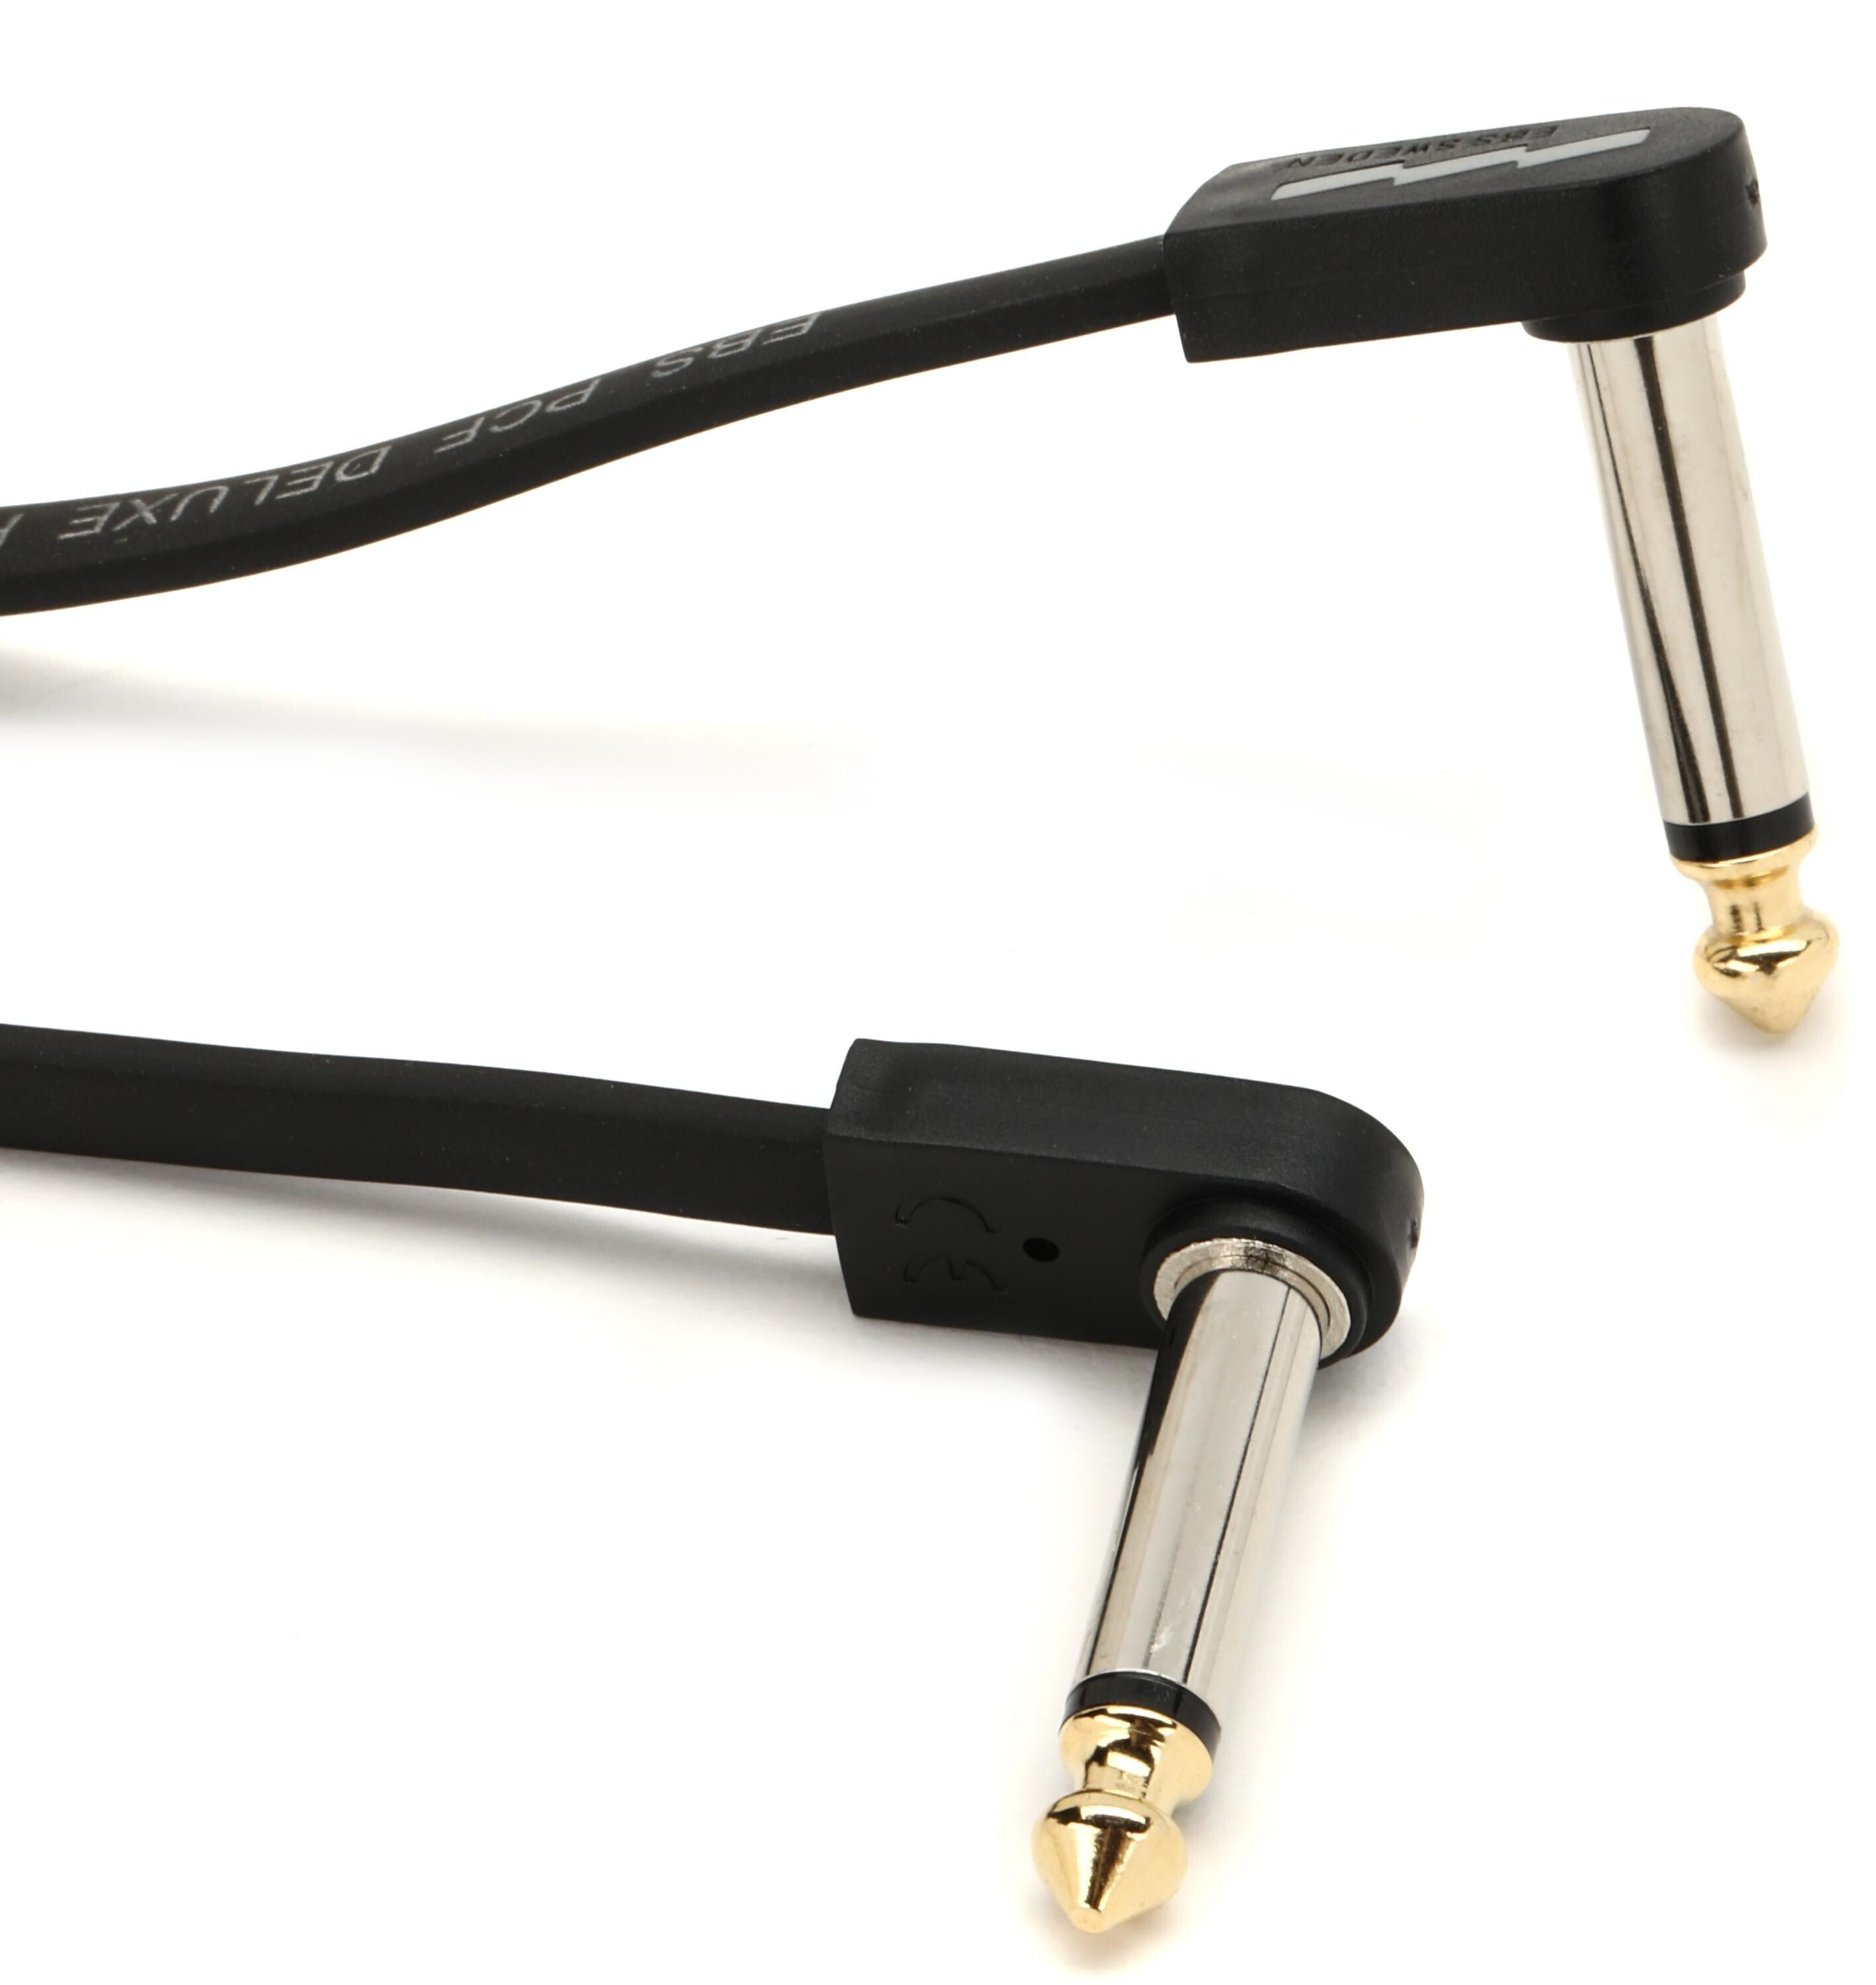 Bundled Item: EBS PCF-DL10 Deluxe Flat Patch Cable - Right Angle to Right Angle - 3.94 inch